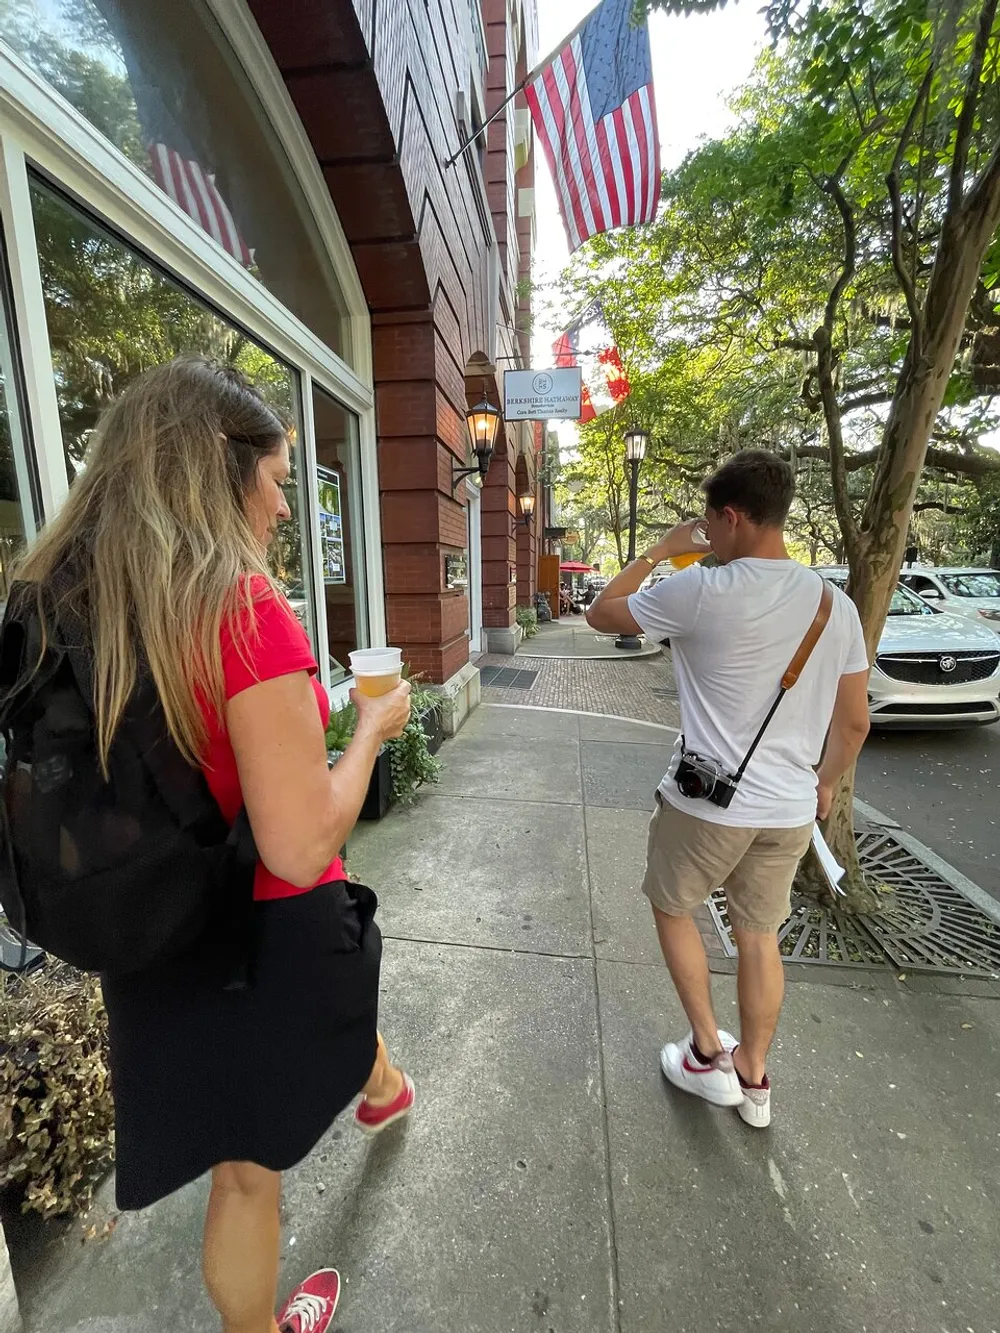 A man and a woman are walking on a sidewalk with the woman holding a coffee cup passing by a building that is flying American flags on a sunny day